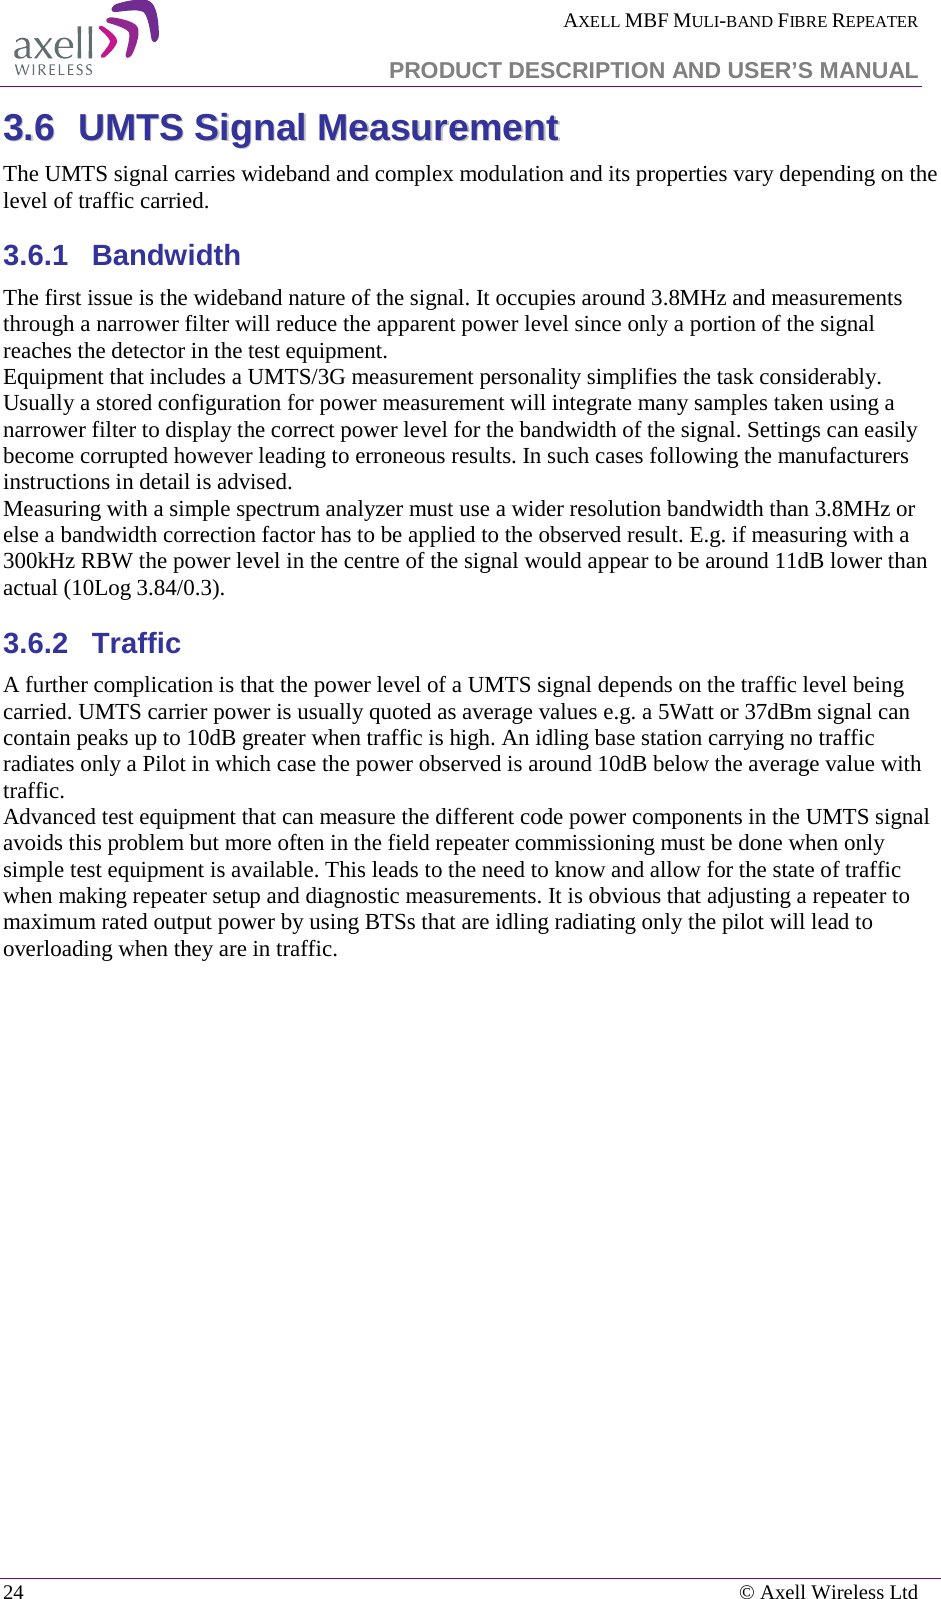  AXELL MBF MULI-BAND FIBRE REPEATER   PRODUCT DESCRIPTION AND USER’S MANUAL 24    © Axell Wireless Ltd 33..66  UUMMTTSS  SSiiggnnaall  MMeeaassuurreemmeenntt  The UMTS signal carries wideband and complex modulation and its properties vary depending on the level of traffic carried. 3.6.1  Bandwidth The first issue is the wideband nature of the signal. It occupies around 3.8MHz and measurements through a narrower filter will reduce the apparent power level since only a portion of the signal reaches the detector in the test equipment.  Equipment that includes a UMTS/3G measurement personality simplifies the task considerably. Usually a stored configuration for power measurement will integrate many samples taken using a narrower filter to display the correct power level for the bandwidth of the signal. Settings can easily become corrupted however leading to erroneous results. In such cases following the manufacturers instructions in detail is advised. Measuring with a simple spectrum analyzer must use a wider resolution bandwidth than 3.8MHz or else a bandwidth correction factor has to be applied to the observed result. E.g. if measuring with a 300kHz RBW the power level in the centre of the signal would appear to be around 11dB lower than actual (10Log 3.84/0.3). 3.6.2  Traffic A further complication is that the power level of a UMTS signal depends on the traffic level being carried. UMTS carrier power is usually quoted as average values e.g. a 5Watt or 37dBm signal can contain peaks up to 10dB greater when traffic is high. An idling base station carrying no traffic radiates only a Pilot in which case the power observed is around 10dB below the average value with traffic.  Advanced test equipment that can measure the different code power components in the UMTS signal avoids this problem but more often in the field repeater commissioning must be done when only simple test equipment is available. This leads to the need to know and allow for the state of traffic when making repeater setup and diagnostic measurements. It is obvious that adjusting a repeater to maximum rated output power by using BTSs that are idling radiating only the pilot will lead to overloading when they are in traffic.      